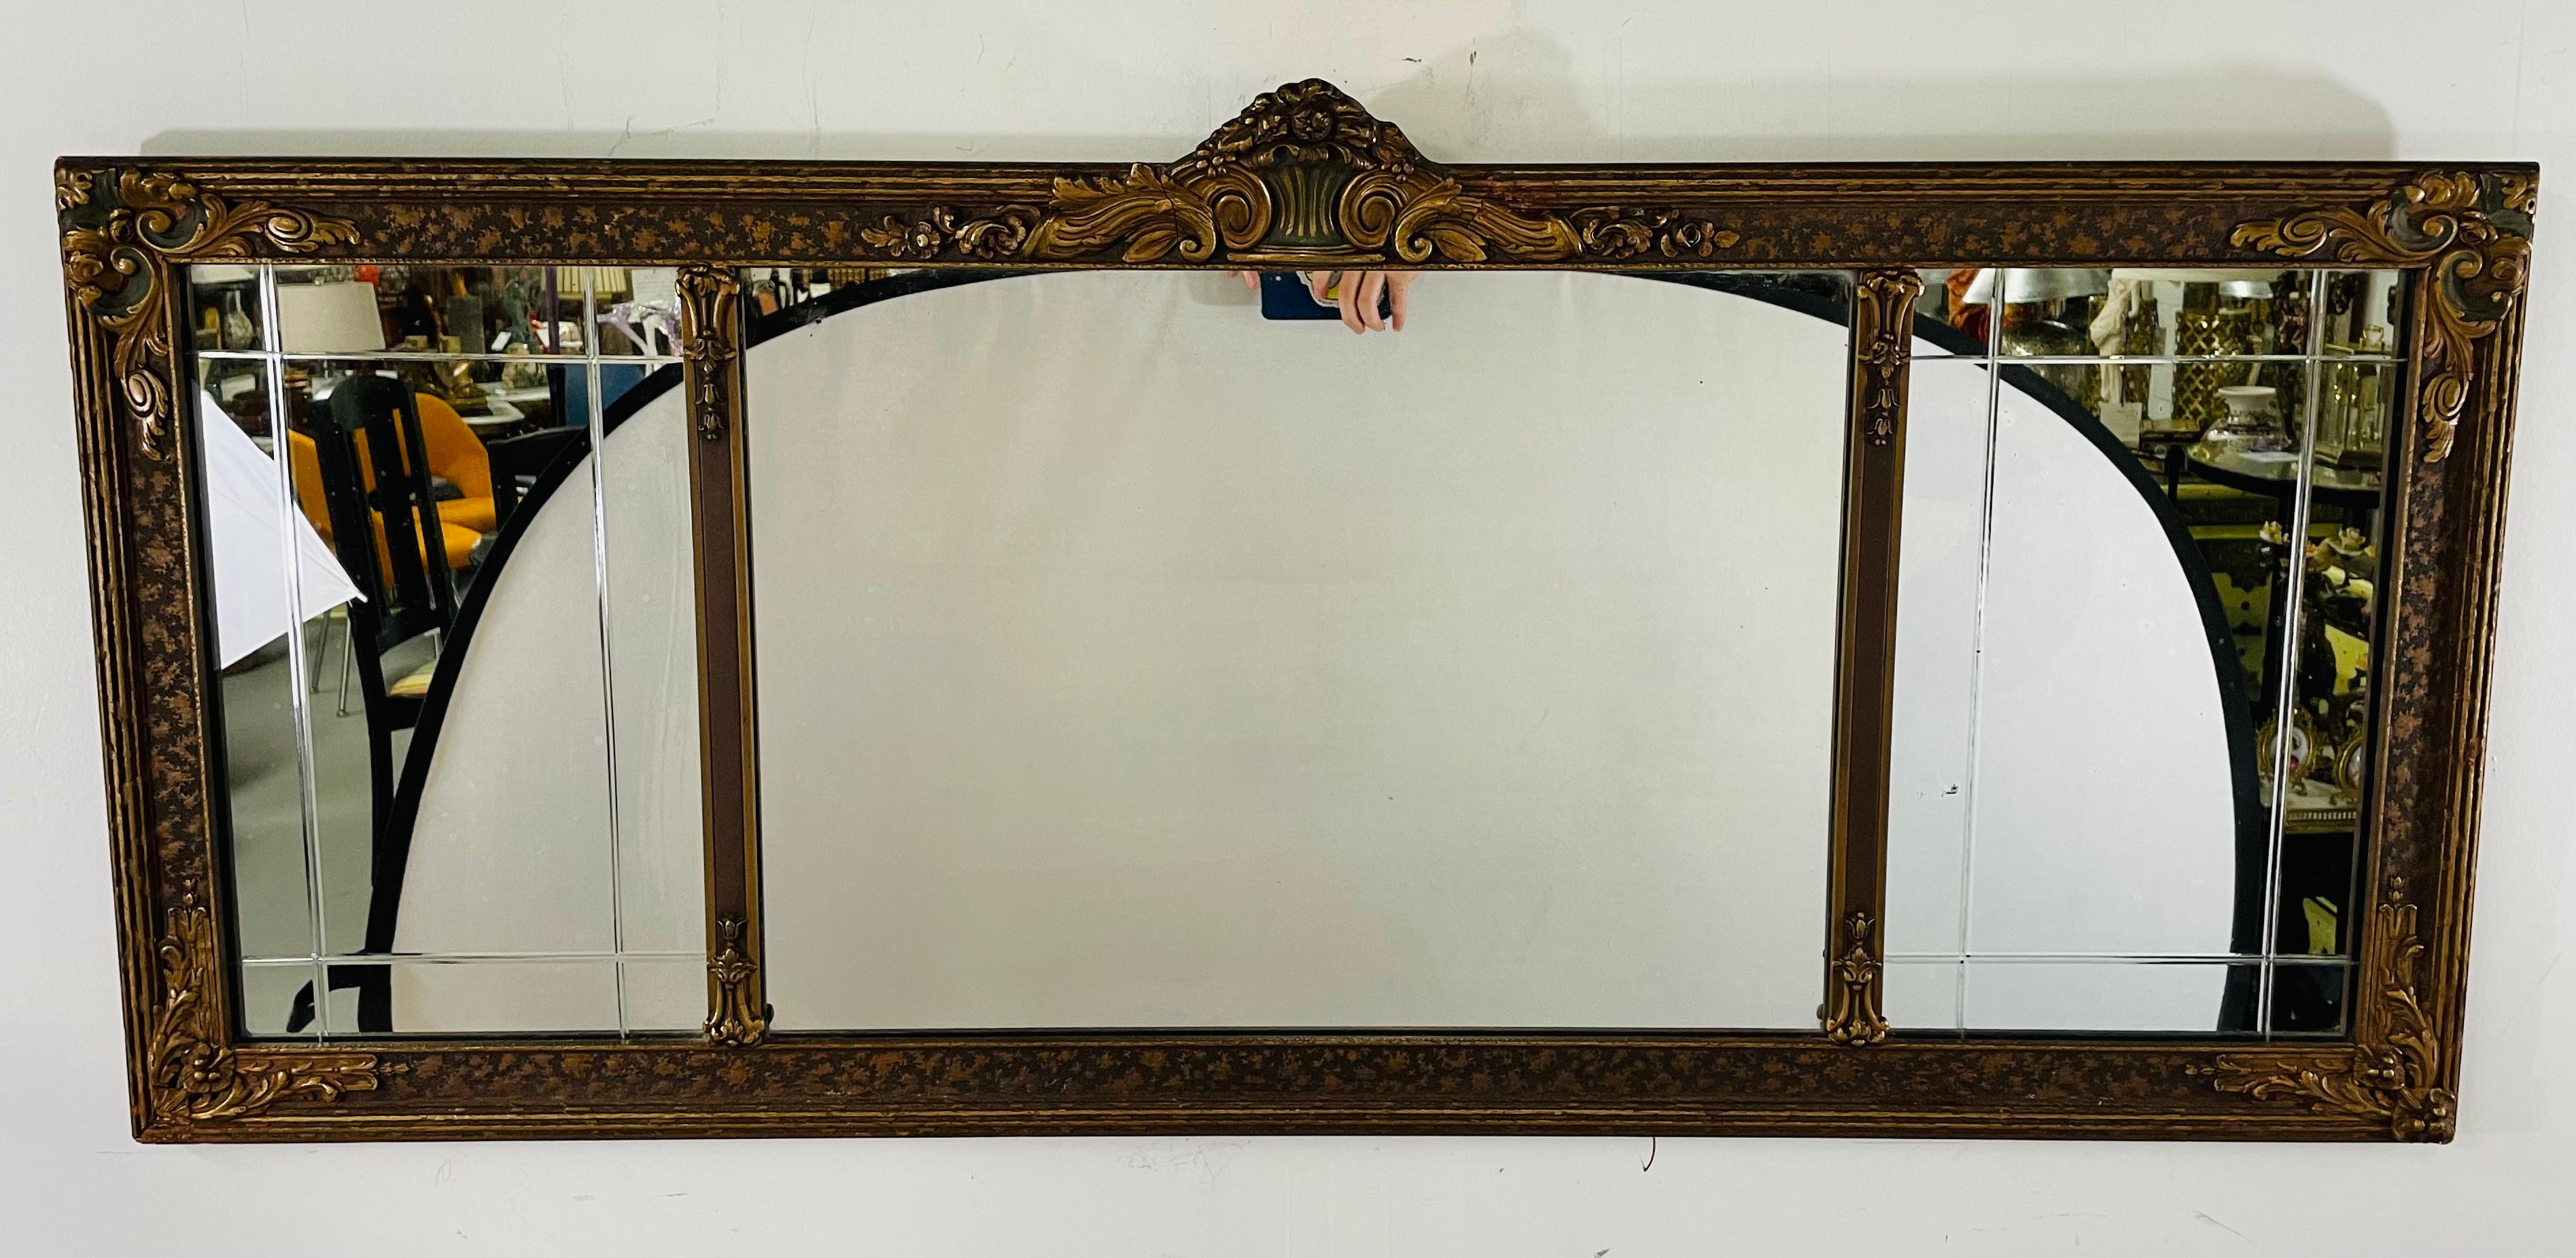 An exceptional French Art Deco three paneled overmantel mirror featuring carved gilt wood and a lovely floral design all over the frame with a carved cartouche in acanthus leaf design. Both side mirror glass panels are decorated with rectangular